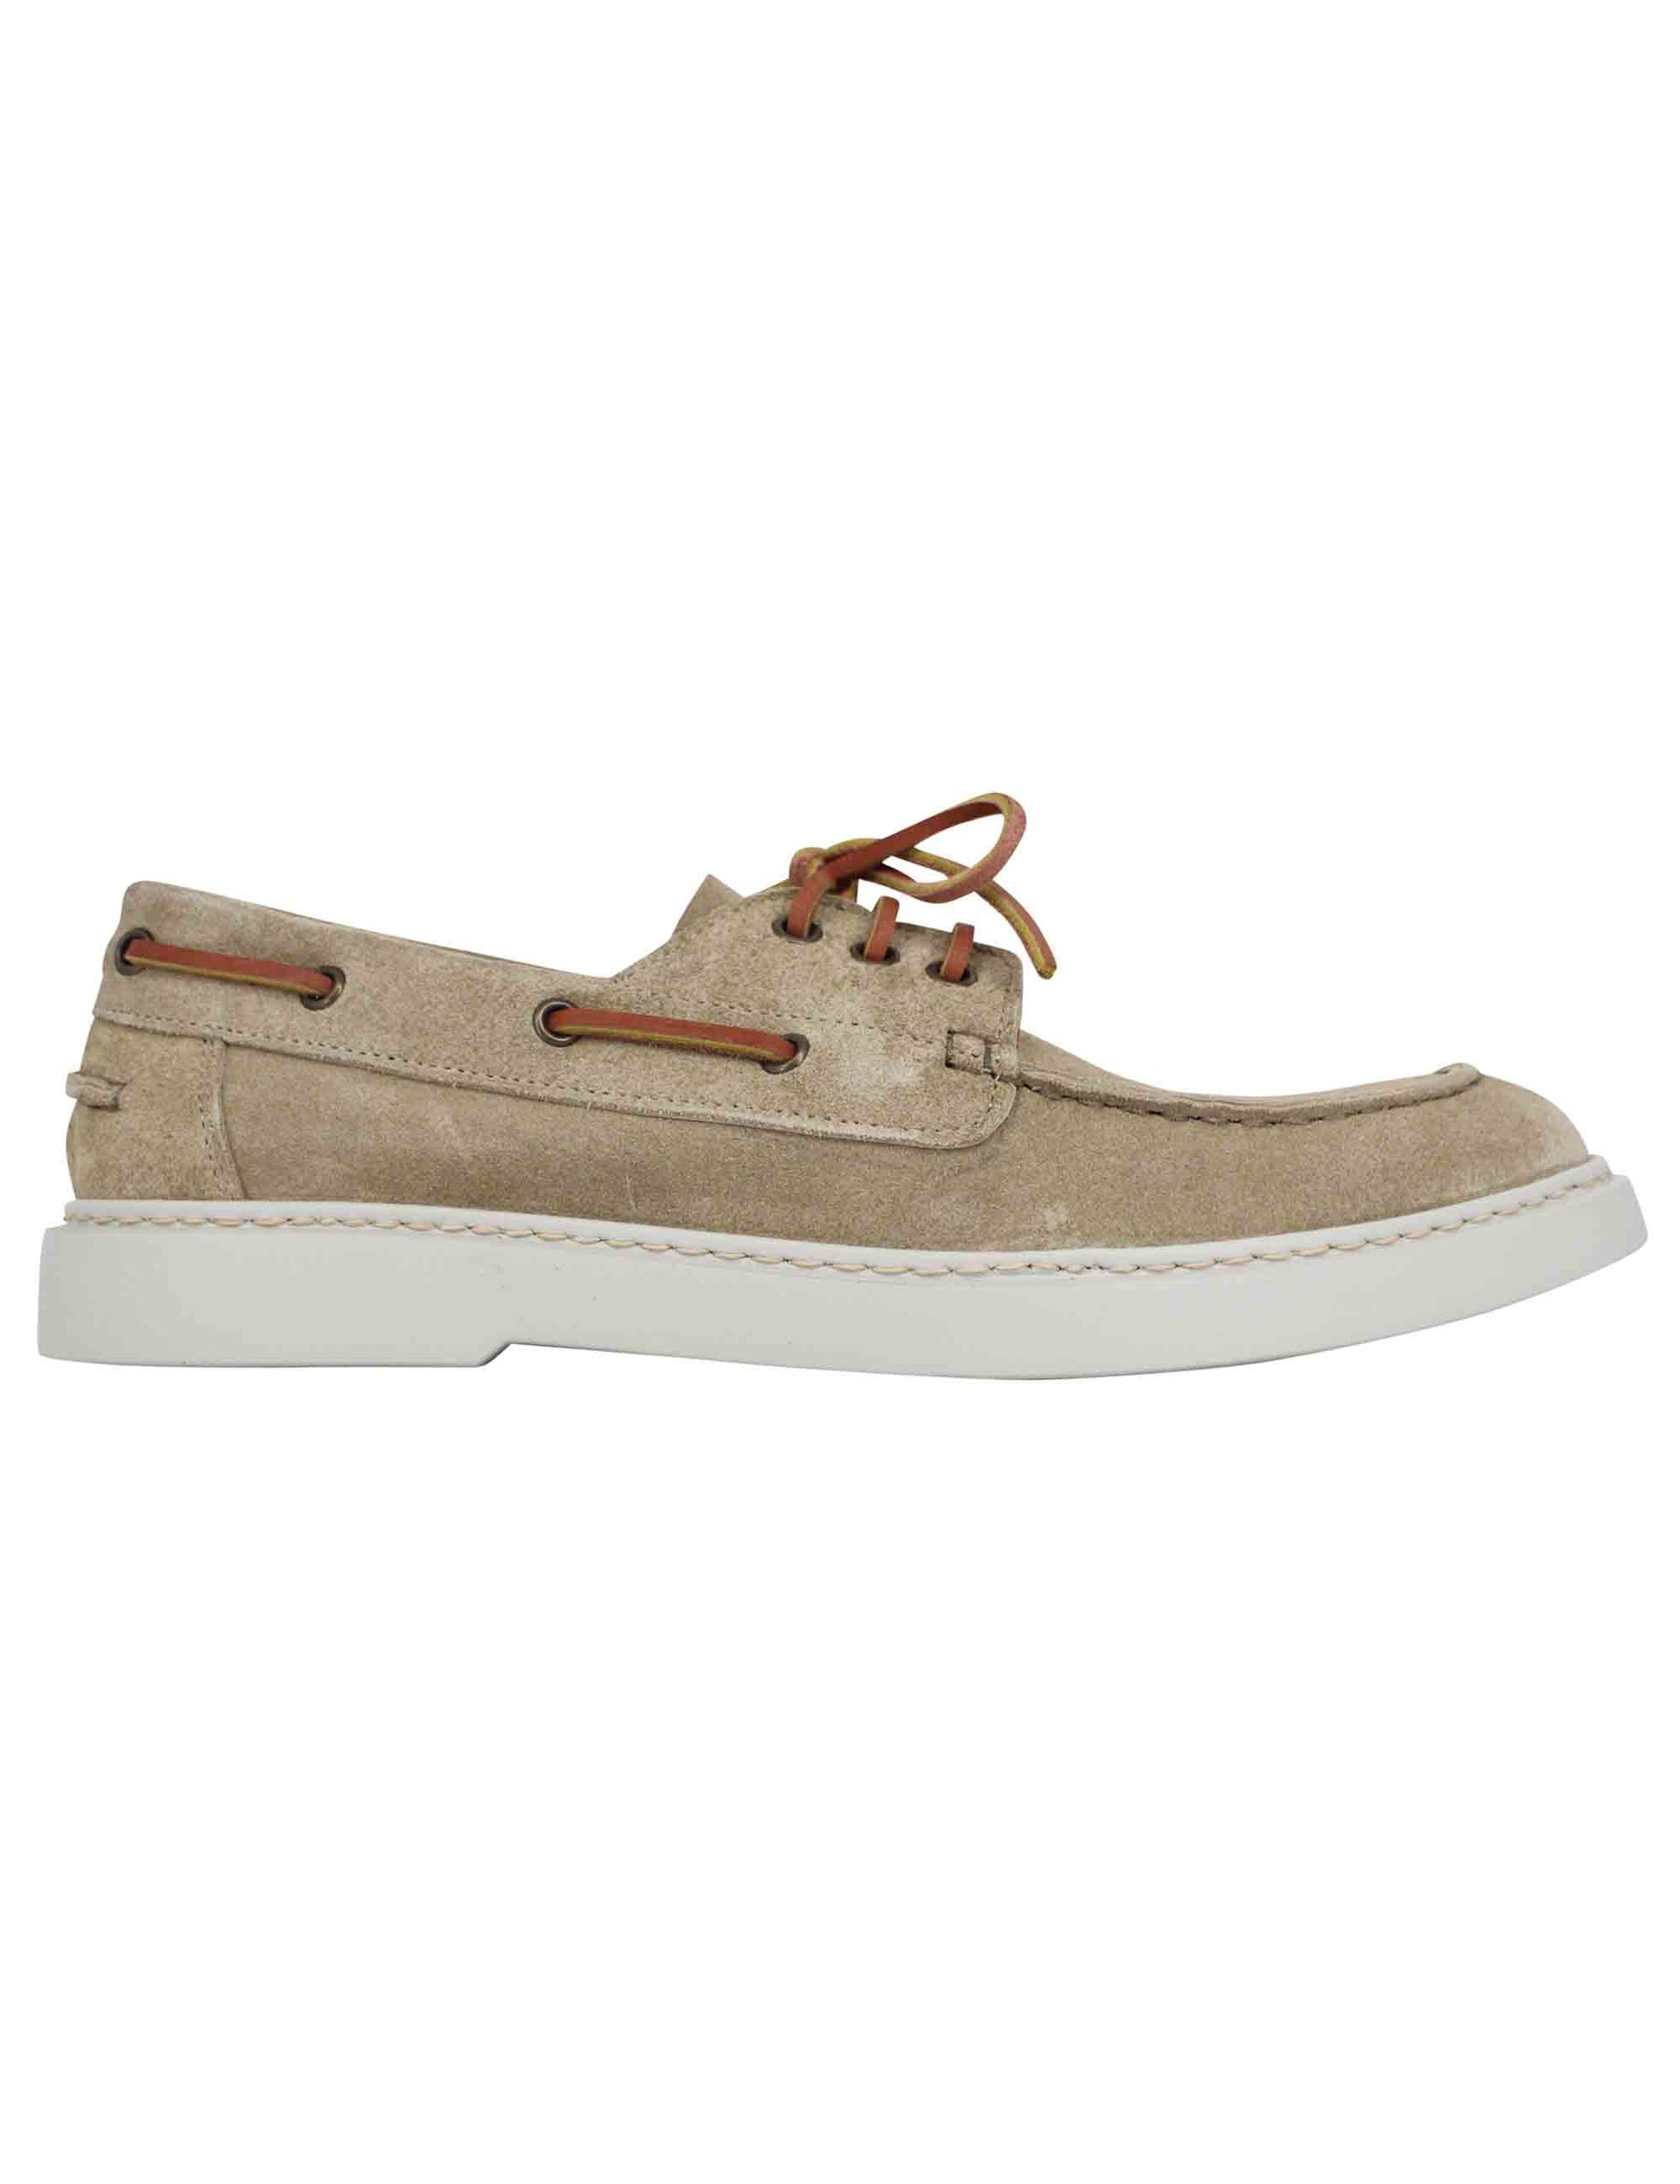 Men's lace-ups in beige suede with leather laces